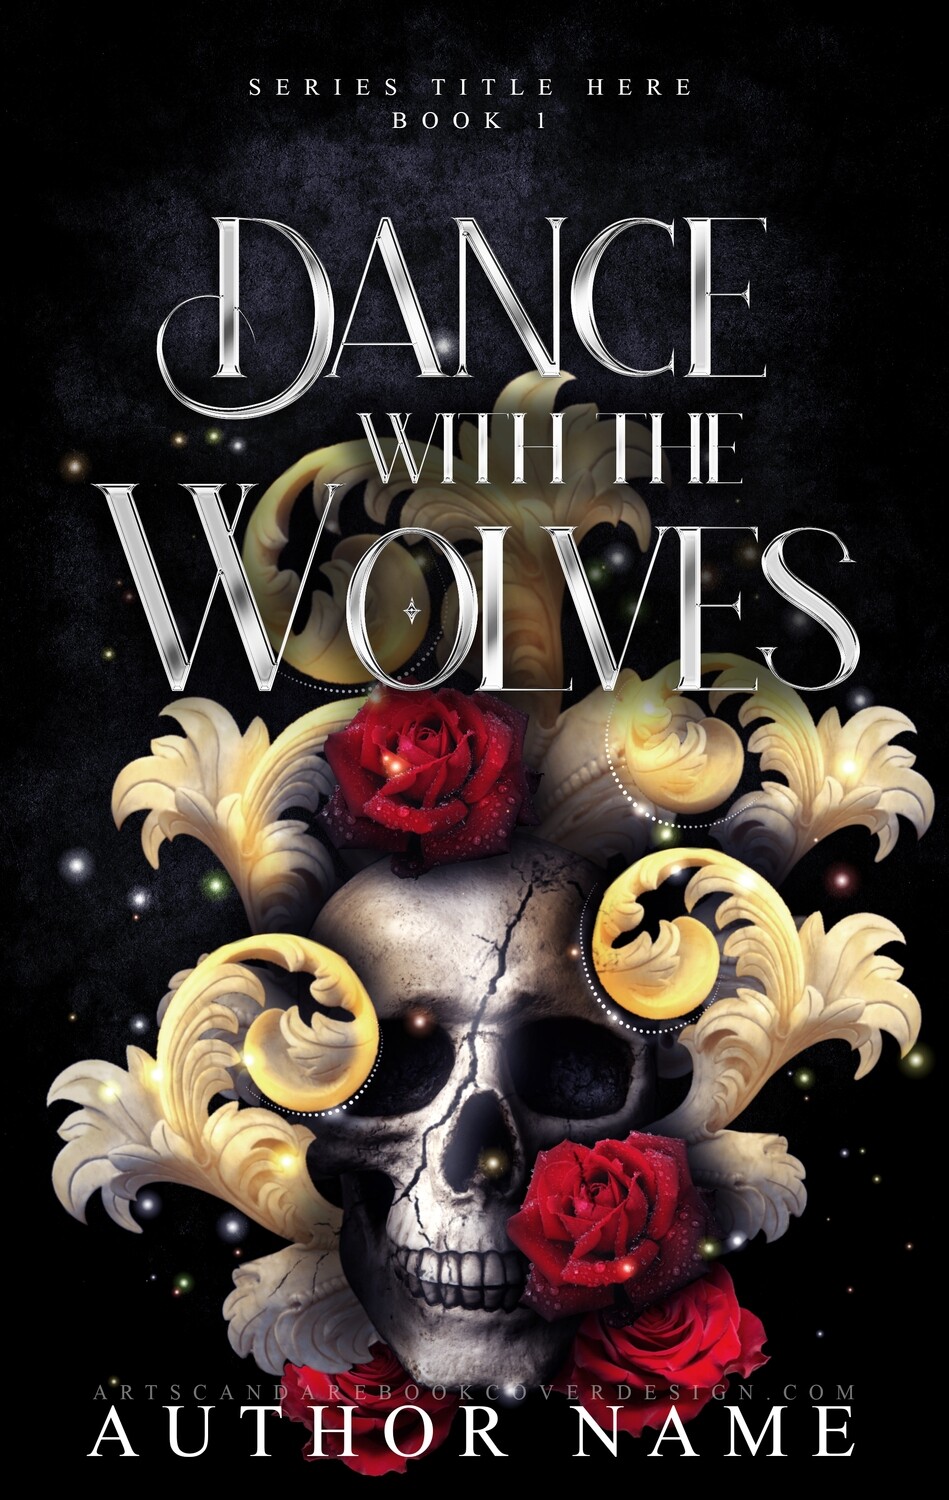 DANCE WITH THE WOLVES